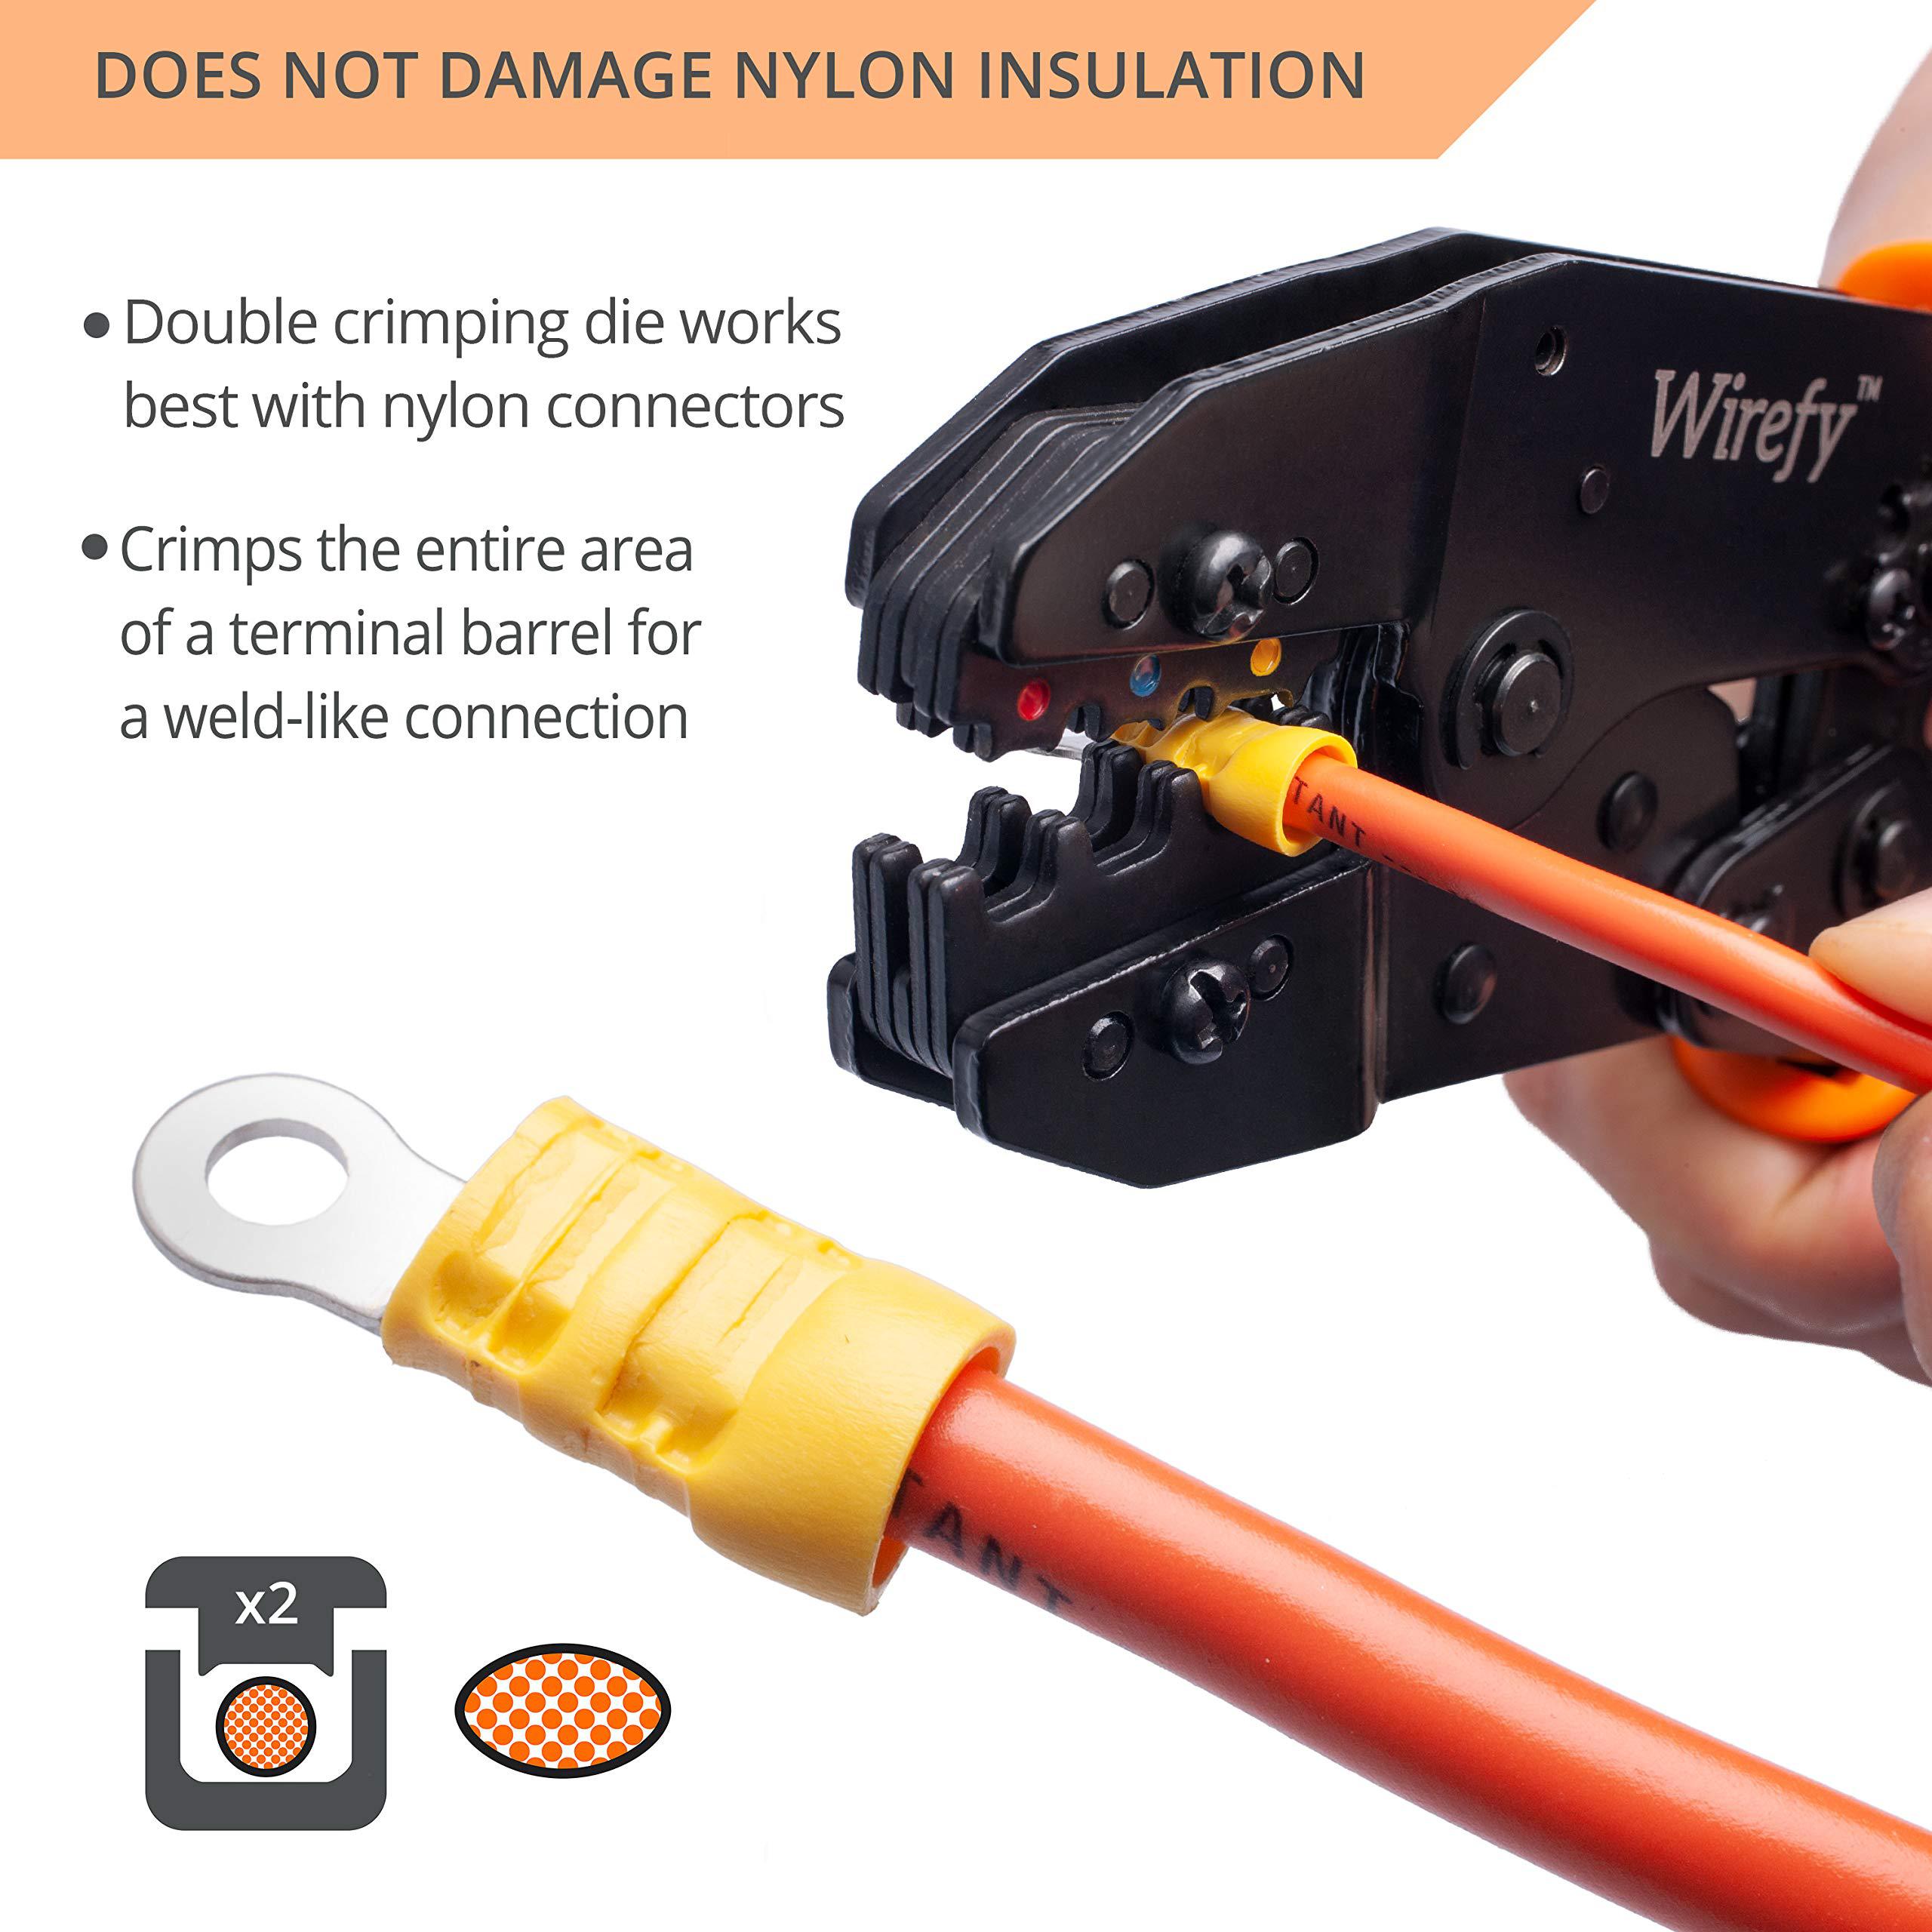 wirefy crimping tool for insulated electrical connectors - ratcheting wire crimper - crimping pliers - ratchet terminal crimp